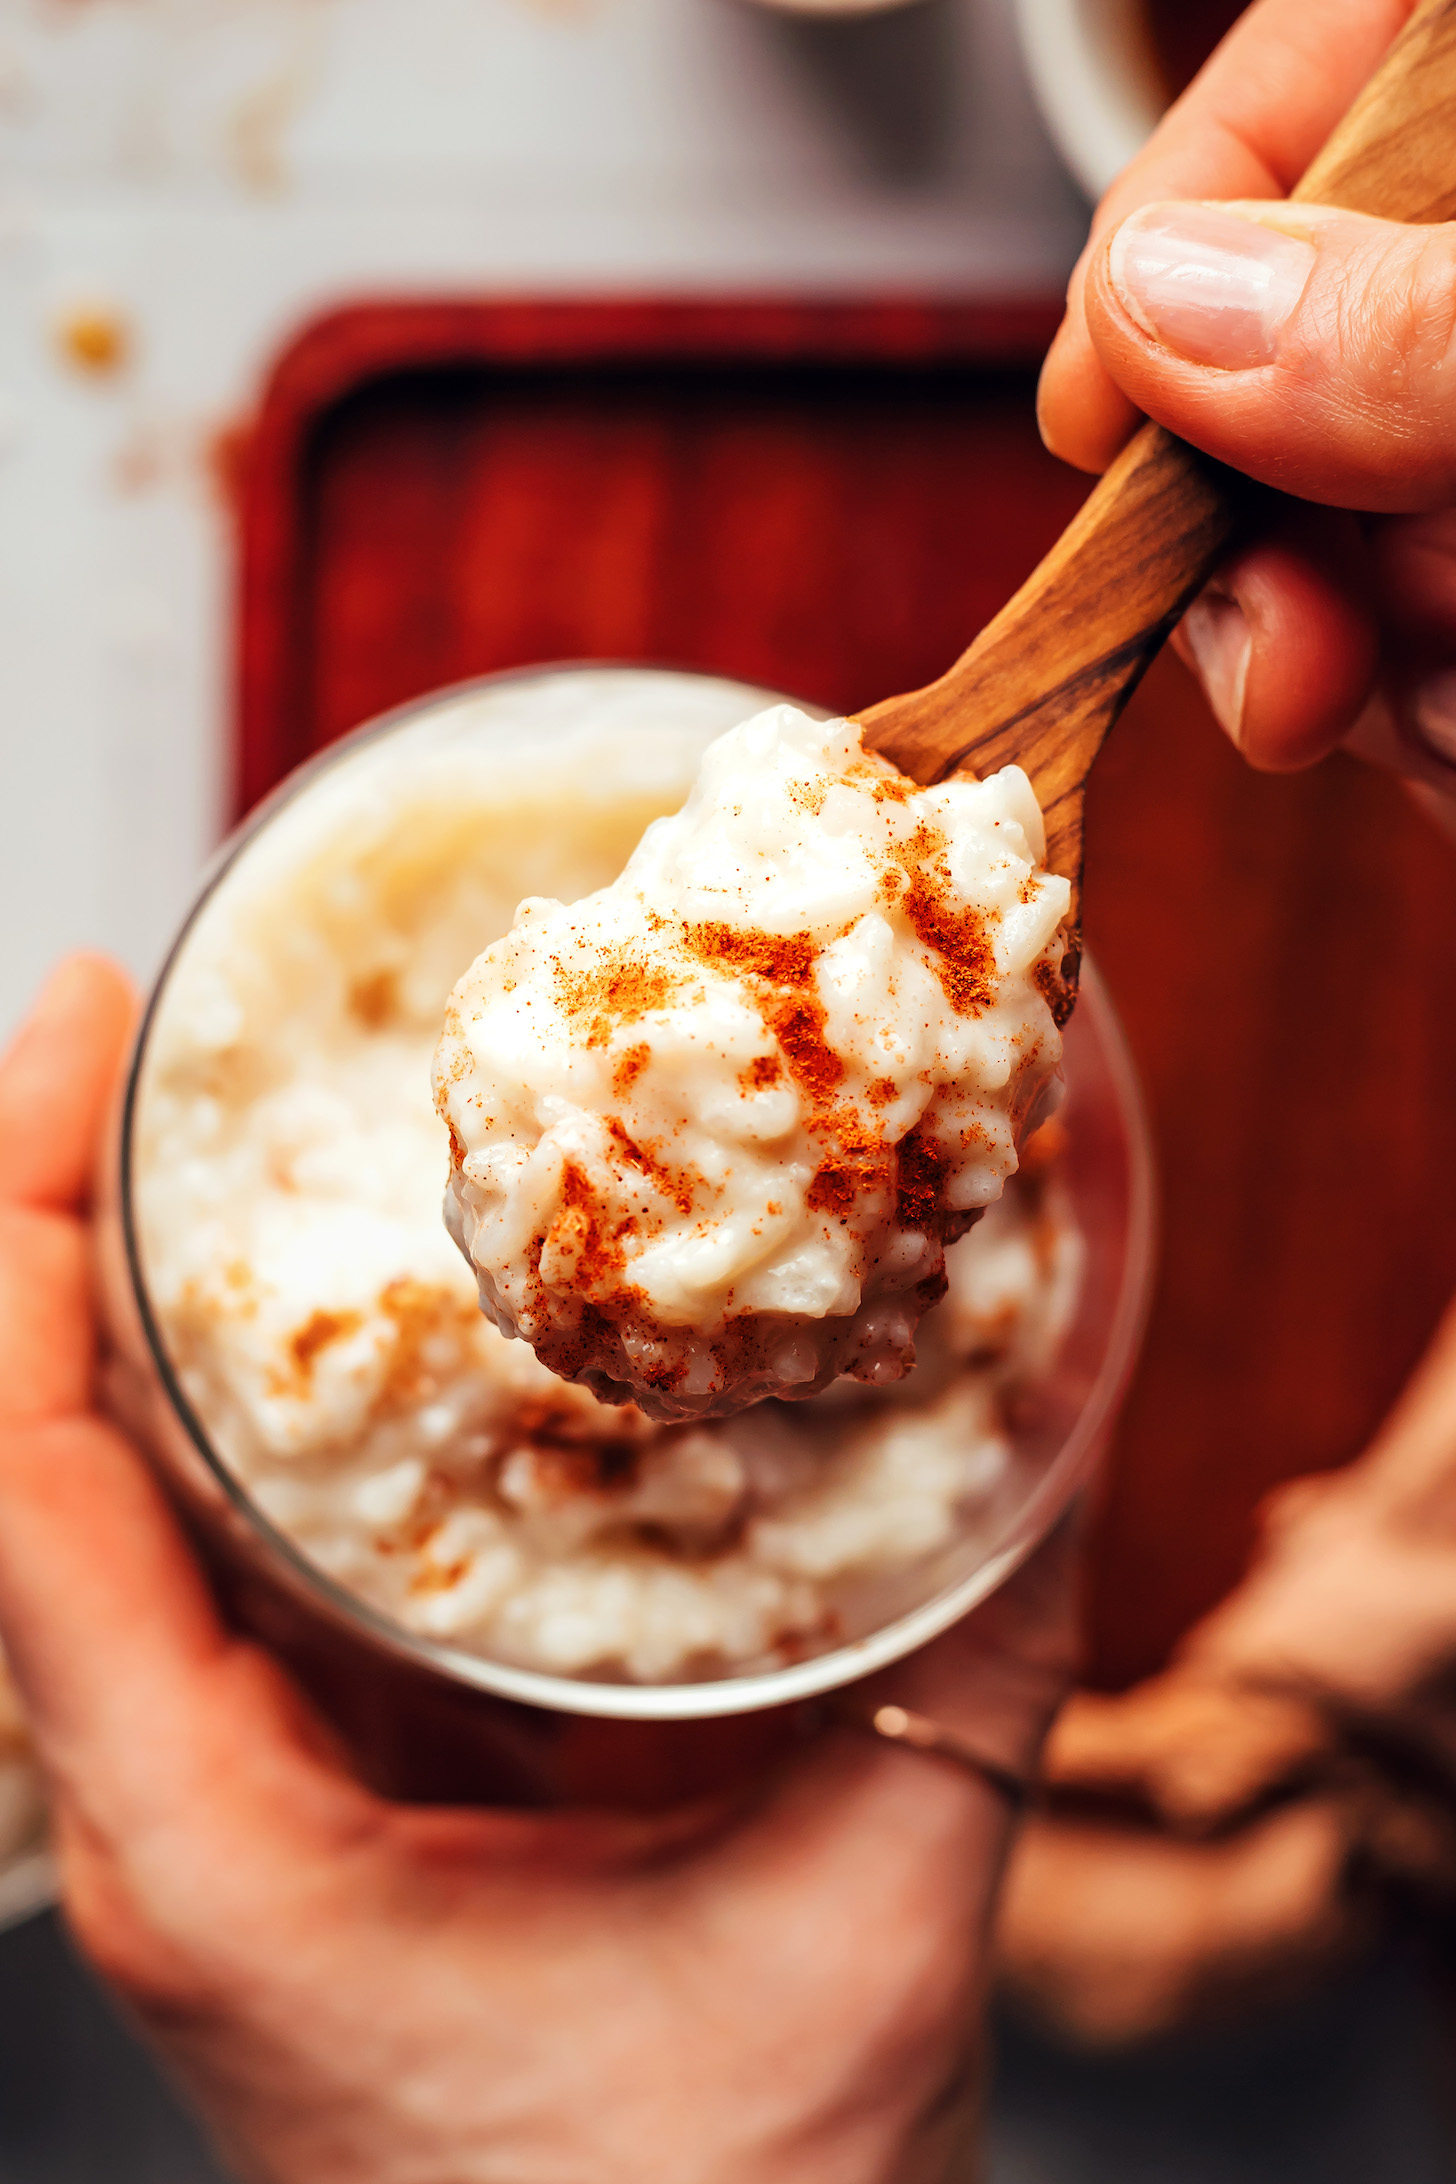 Take a bite of rice pudding and sprinkle with cinnamon